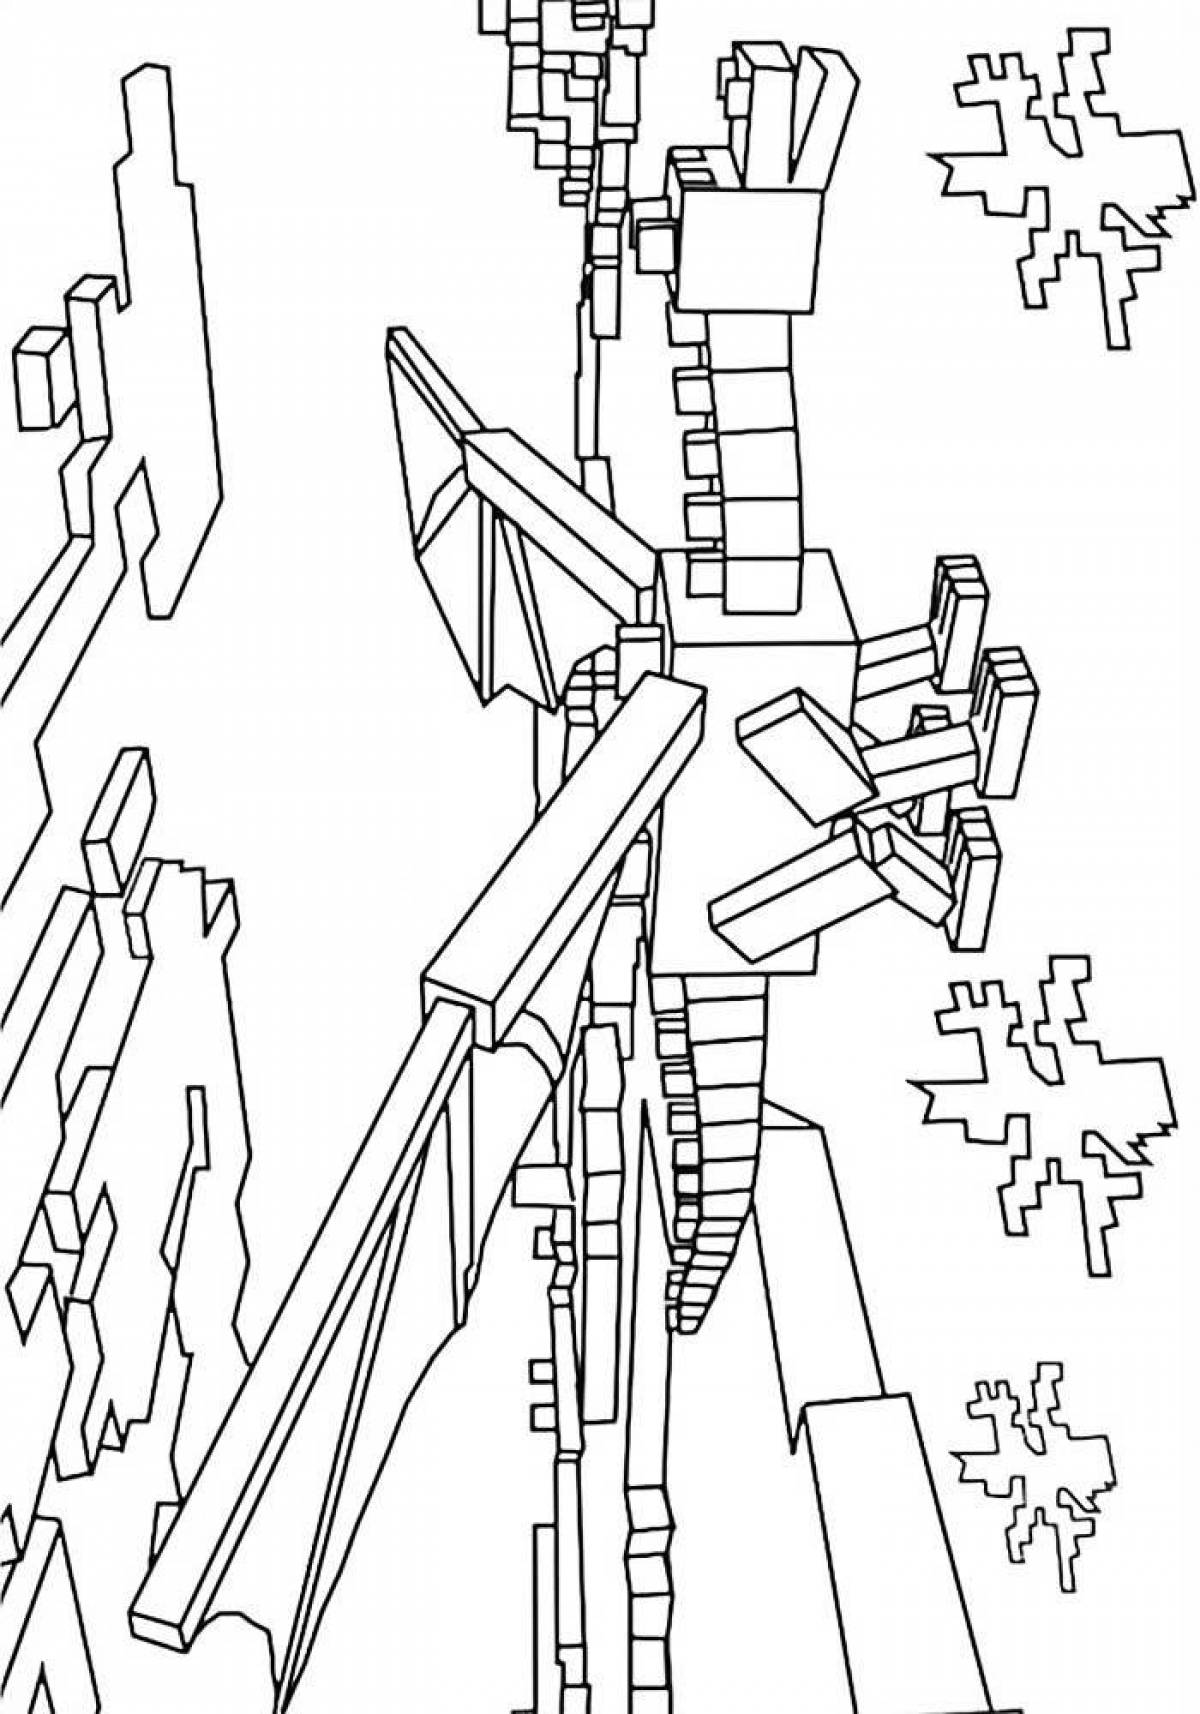 Lovely enderman coloring page